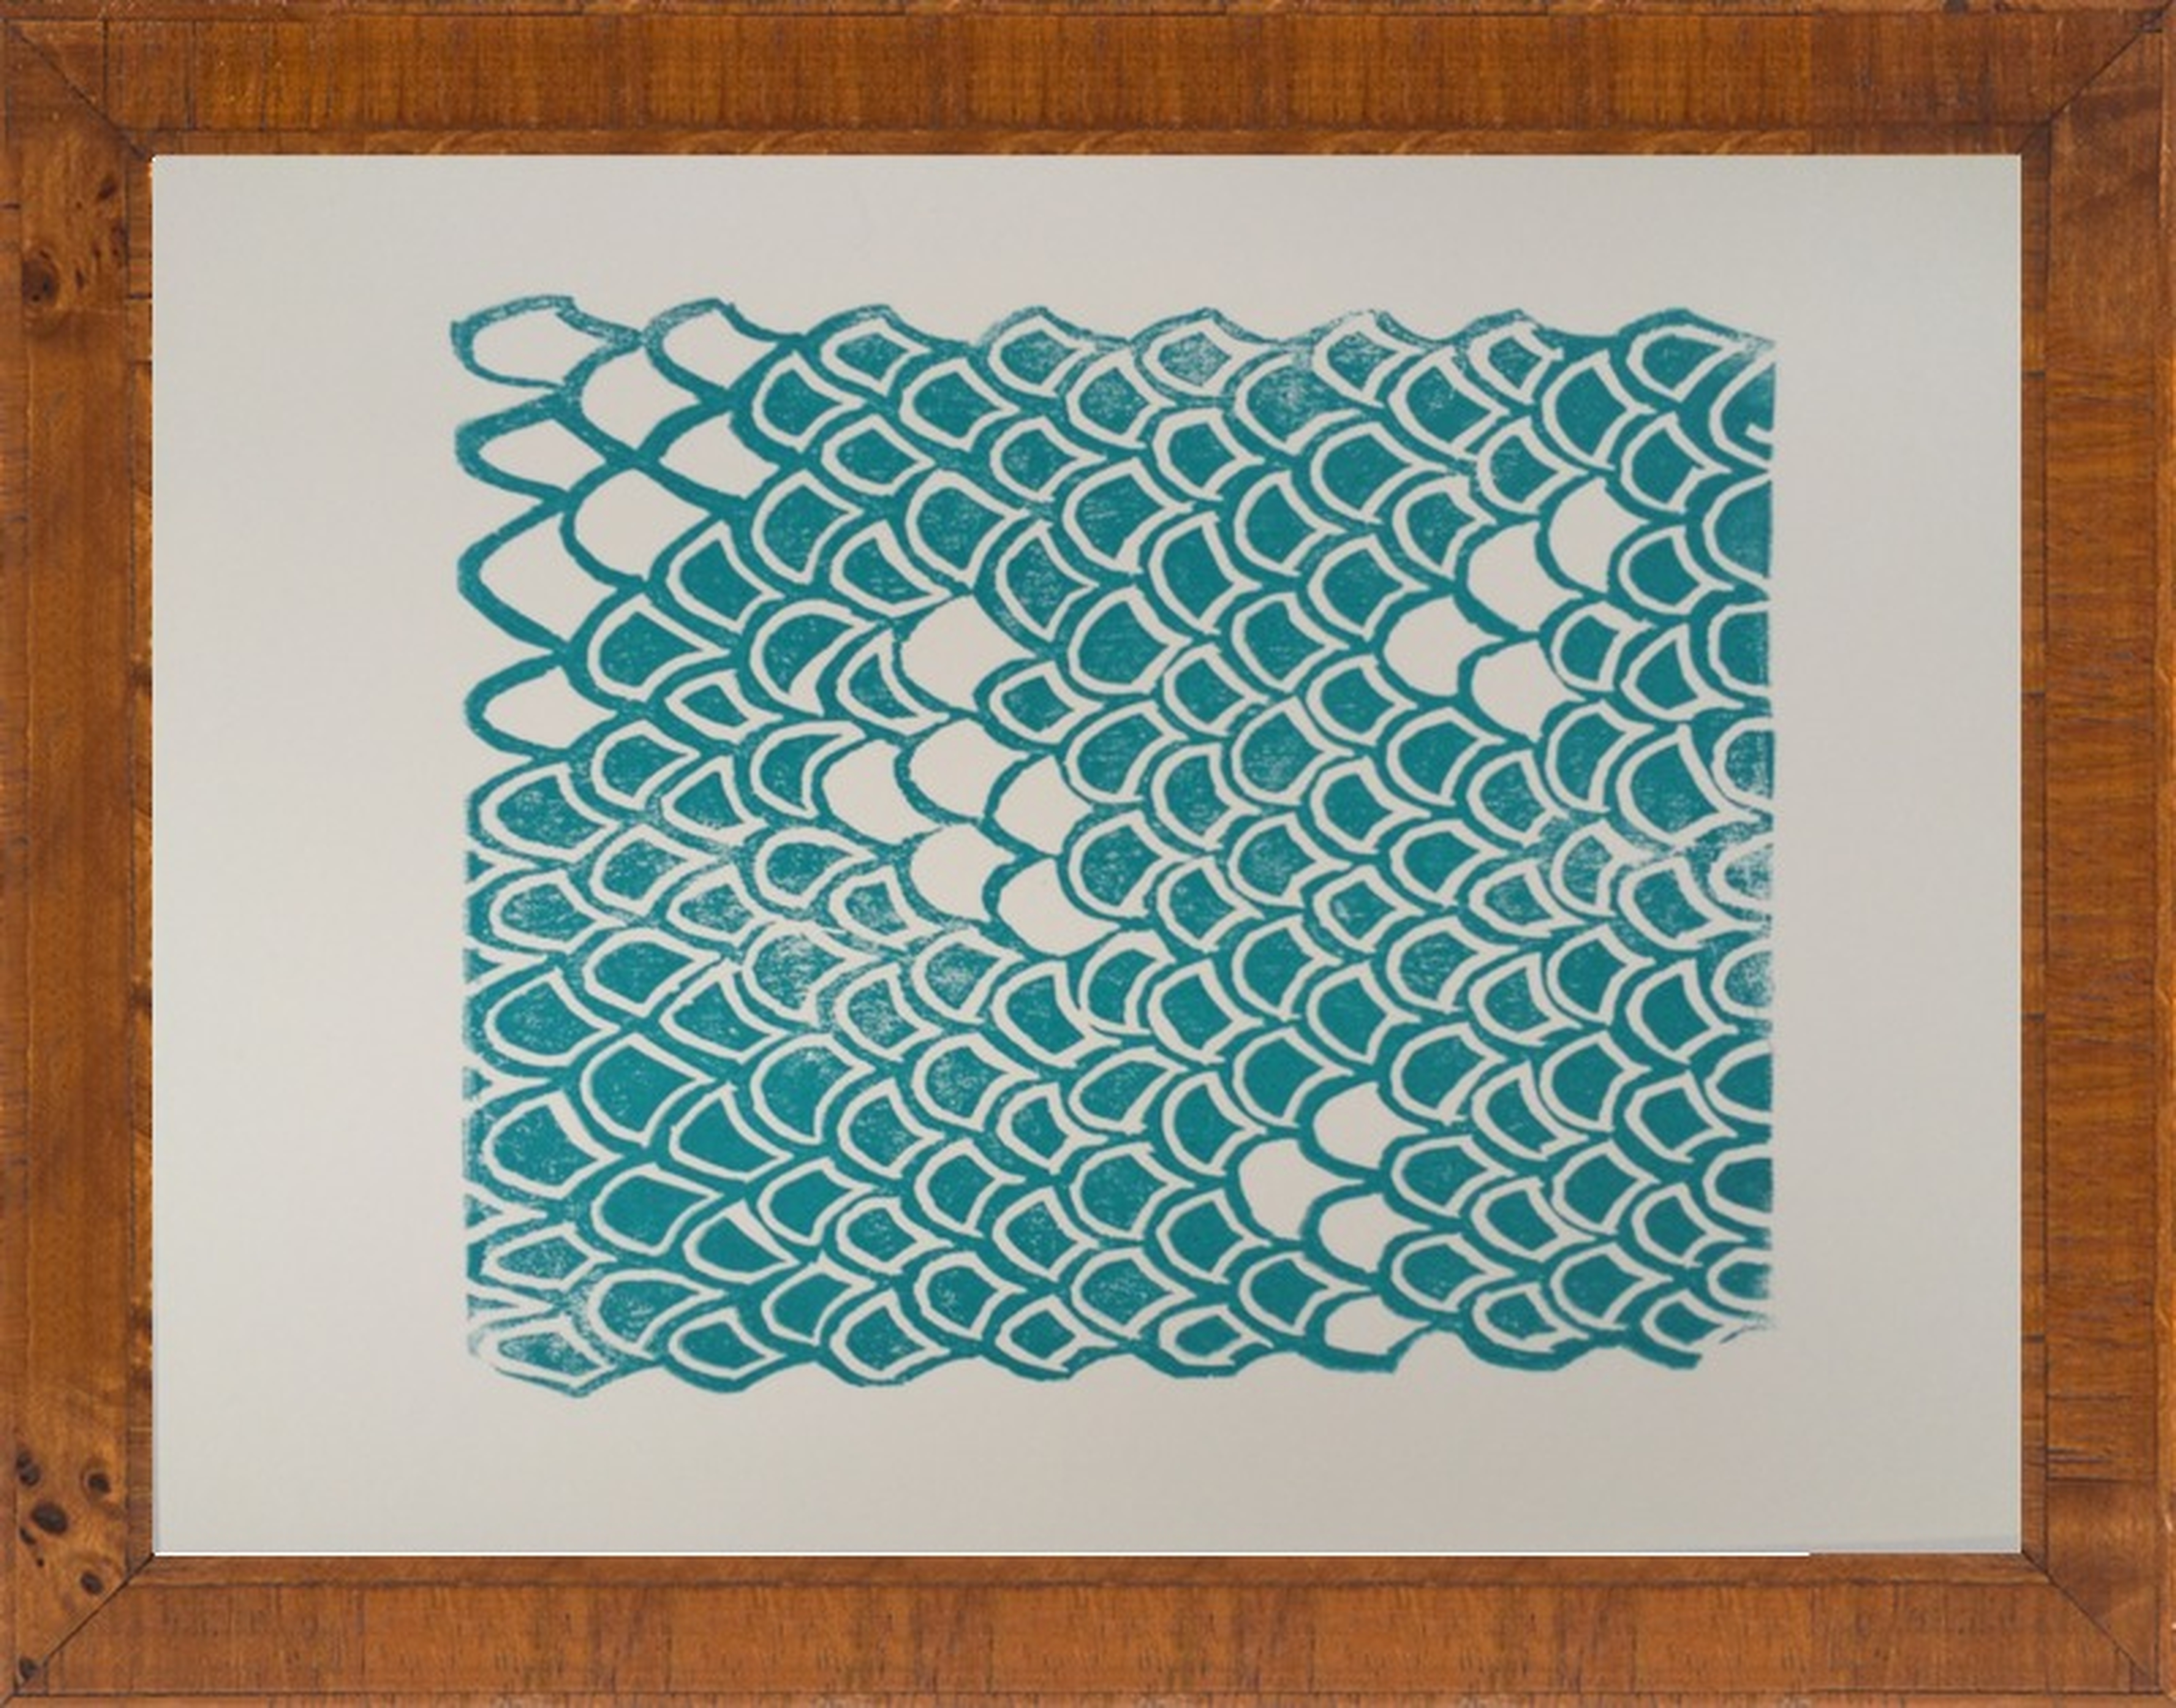 Blue Waves by Stacy Rajab for Artfully Walls - Artfully Walls